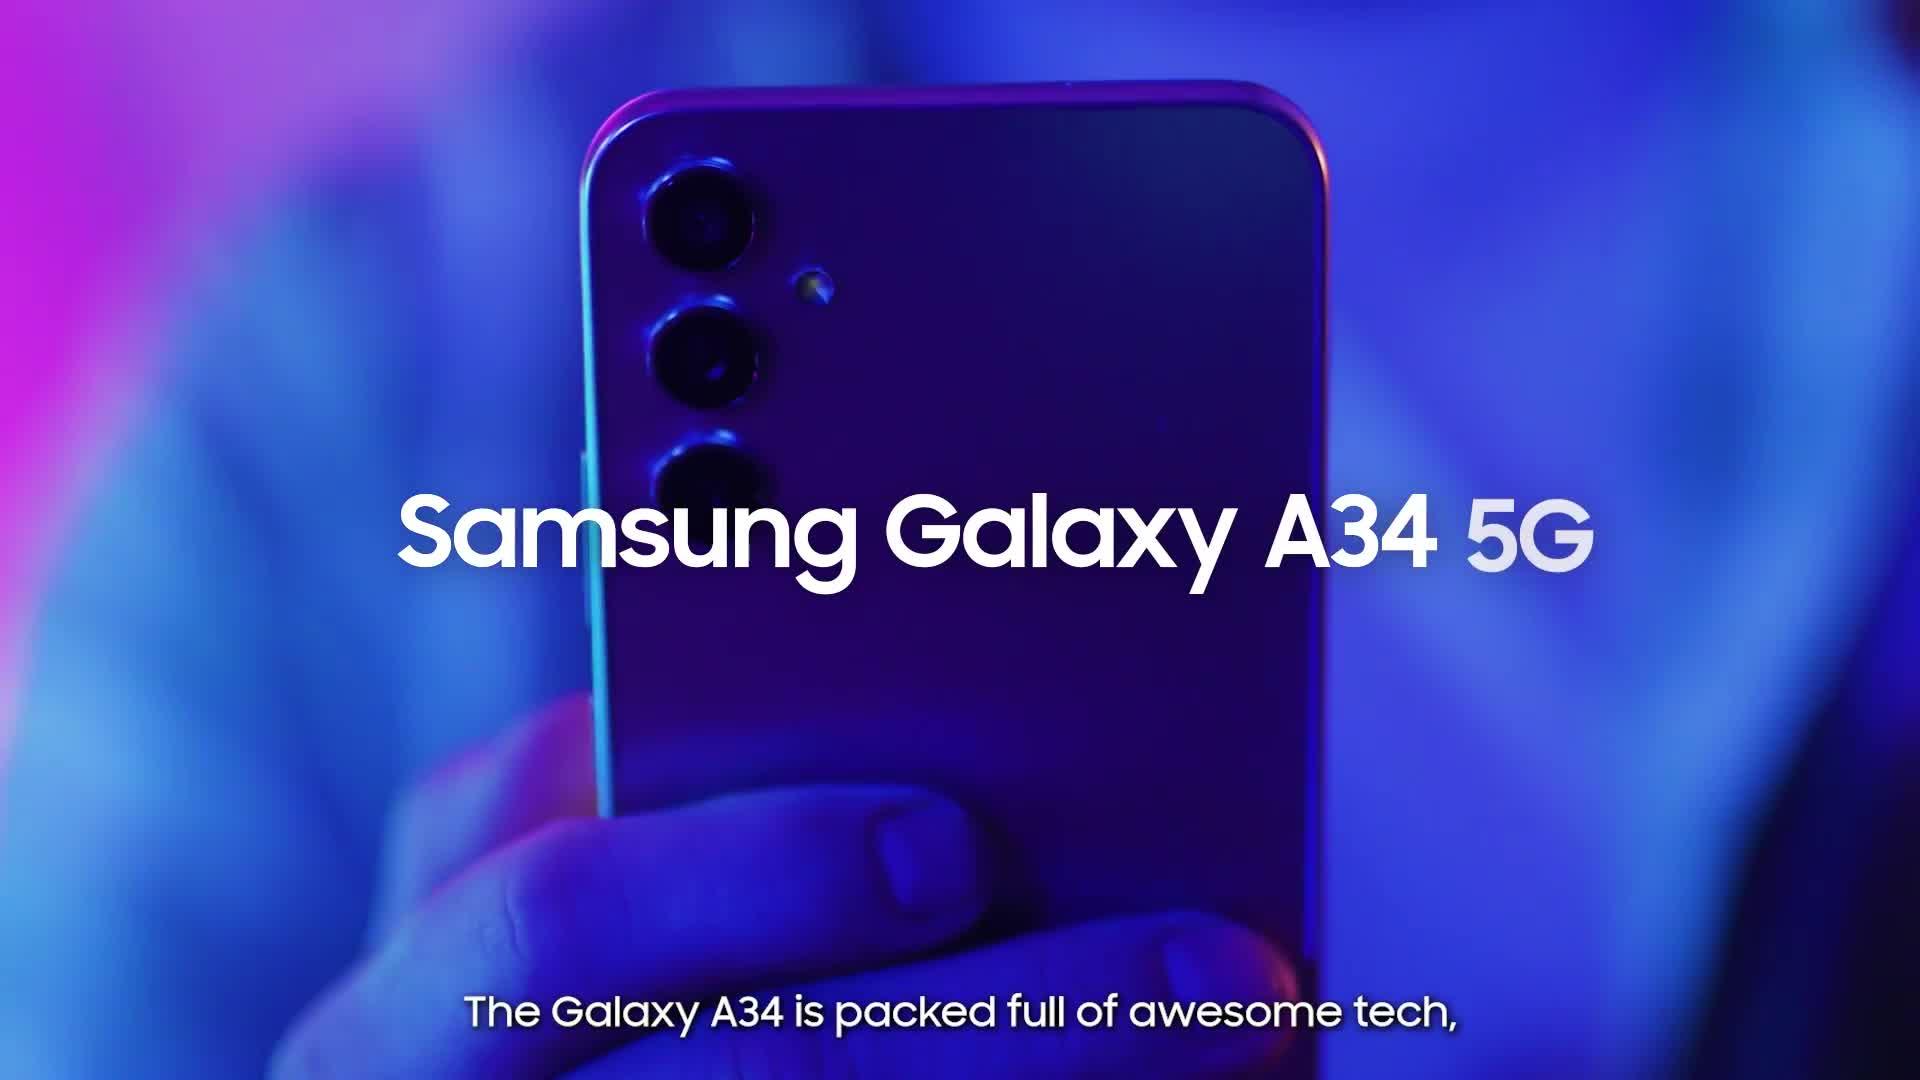 Samsung's Galaxy A34: A balanced review of performance and